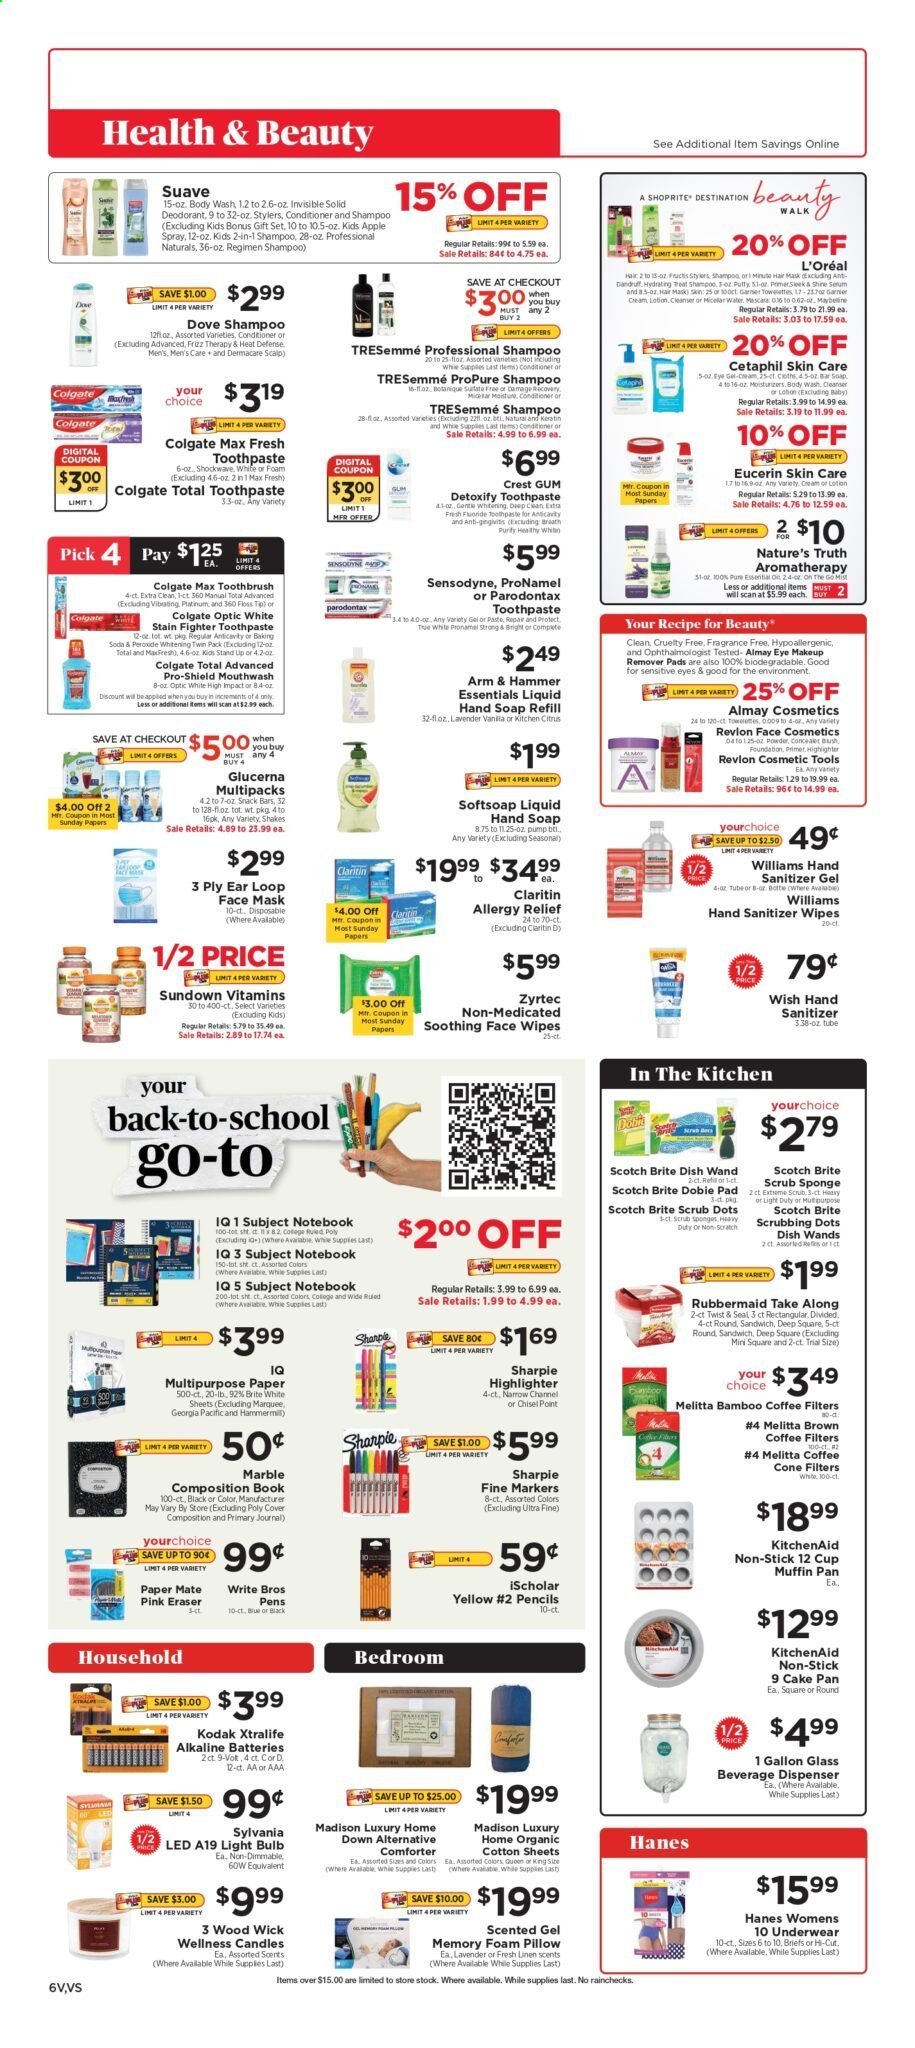 thumbnail - ShopRite Flyer - 08/29/2021 - 09/04/2021 - Sales products - sandwich, MTR, shake, snack, snack bar, ARM & HAMMER, soda, coffee, Purity, wipes, cosmetic tools, body wash, Dove, shampoo, Softsoap, Suave, hand soap, soap bar, soap, Colgate, toothbrush, toothpaste, Sensodyne, mouthwash, Crest, Almay, cleanser, eye gel, Garnier, L’Oréal, serum, face mask, conditioner, Revlon, TRESemmé, hair mask, keratin, body lotion, Eucerin, anti-perspirant, deodorant, sponge, KitchenAid, pan, cake pan, cup, dispenser, eraser, paper, Paper Mate, Sharpie, candle, battery, bulb, light bulb, Sylvania, alkaline batteries, Nature's Truth, Zyrtec, Glucerna, allergy relief. Page 6.